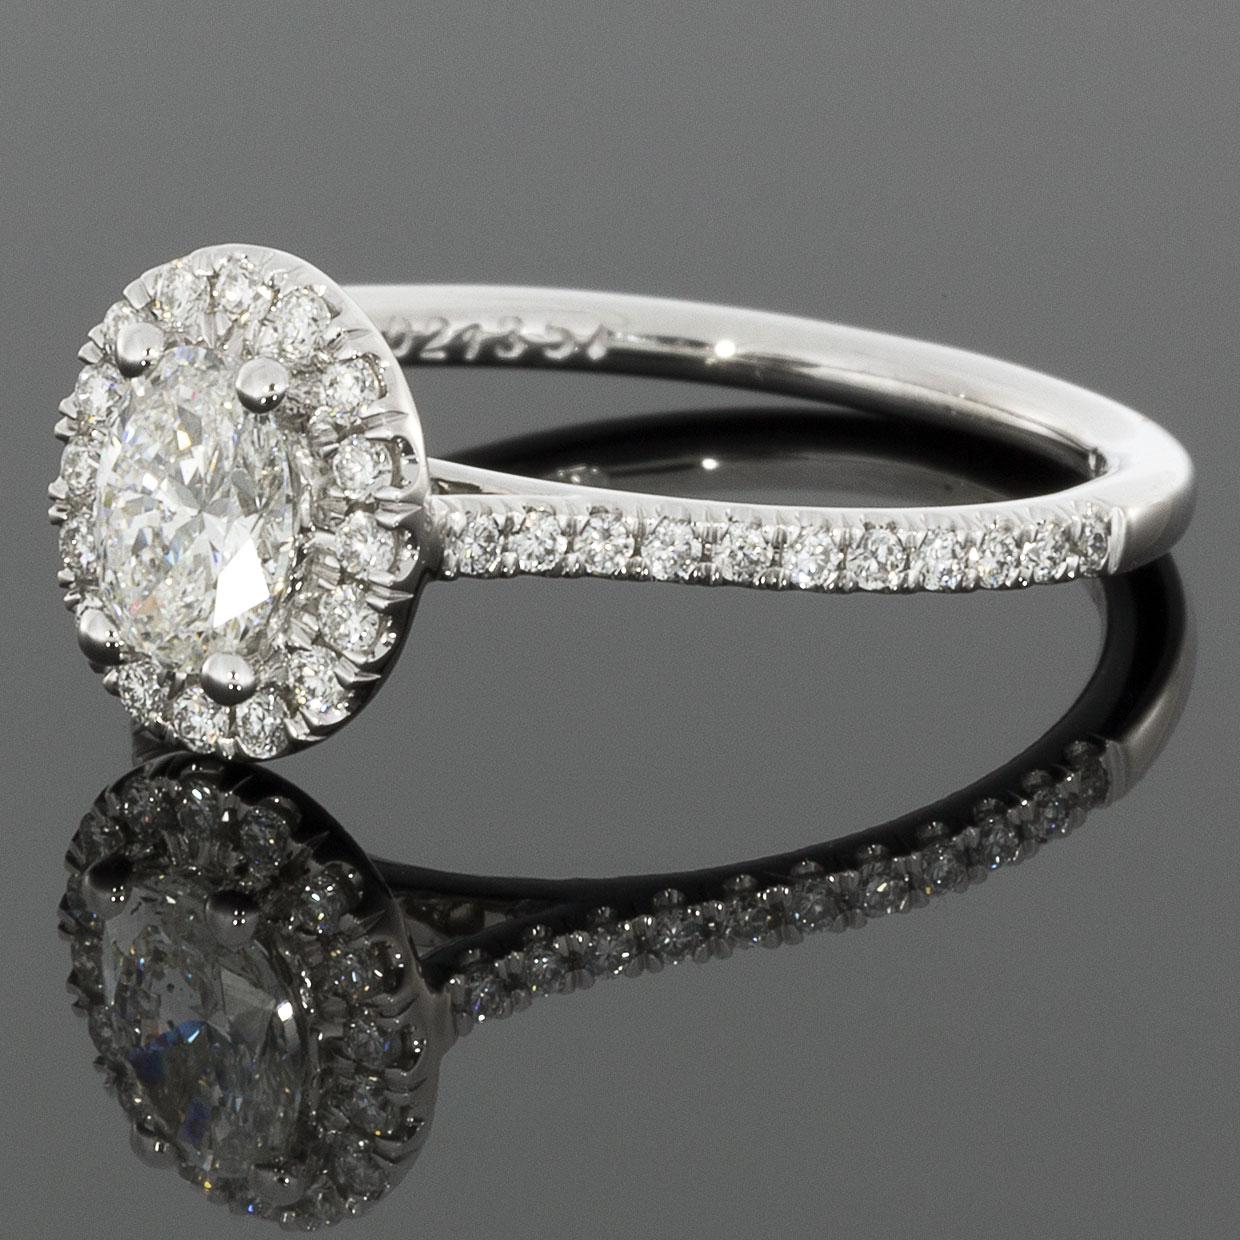 Item Details:
Brand - Martin Flyer
Metal - White Gold
Complete Ring Total Carat Weight (TCW) - 0.80 ct
Certification/Grading - GIA
Style - Halo Engagement Ring
Ring Size - 6.50
Sizable - Yes
Width - 1.60 mm
Metal Purity - 14k

Stone 1